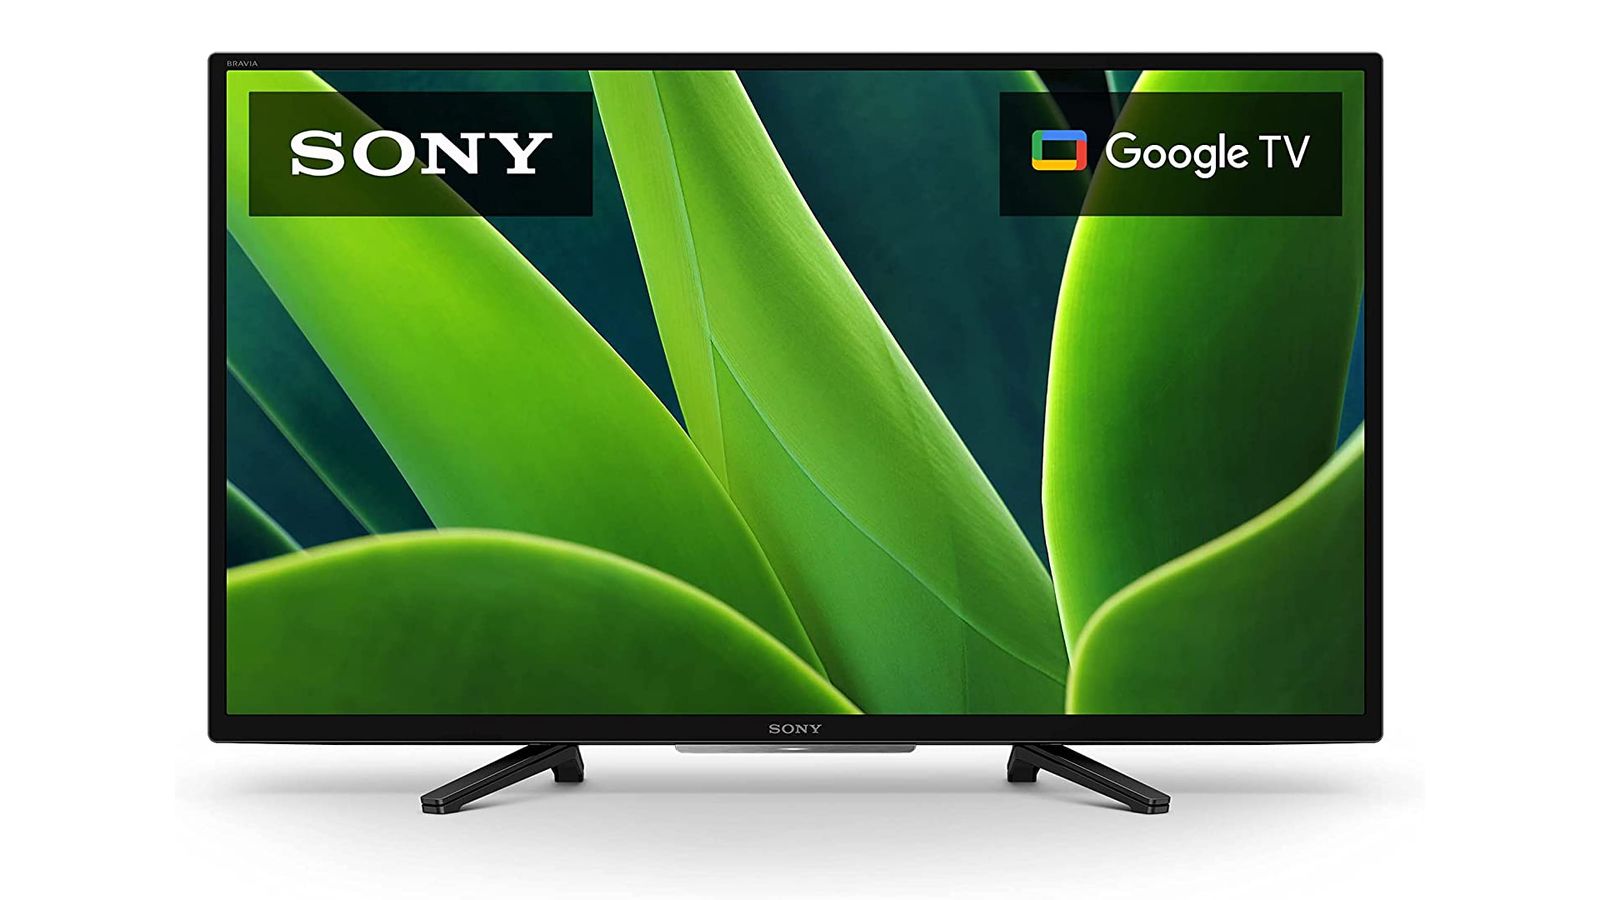 Sony W830K product image of a black TV featuring a close-up of green leaves on the display.